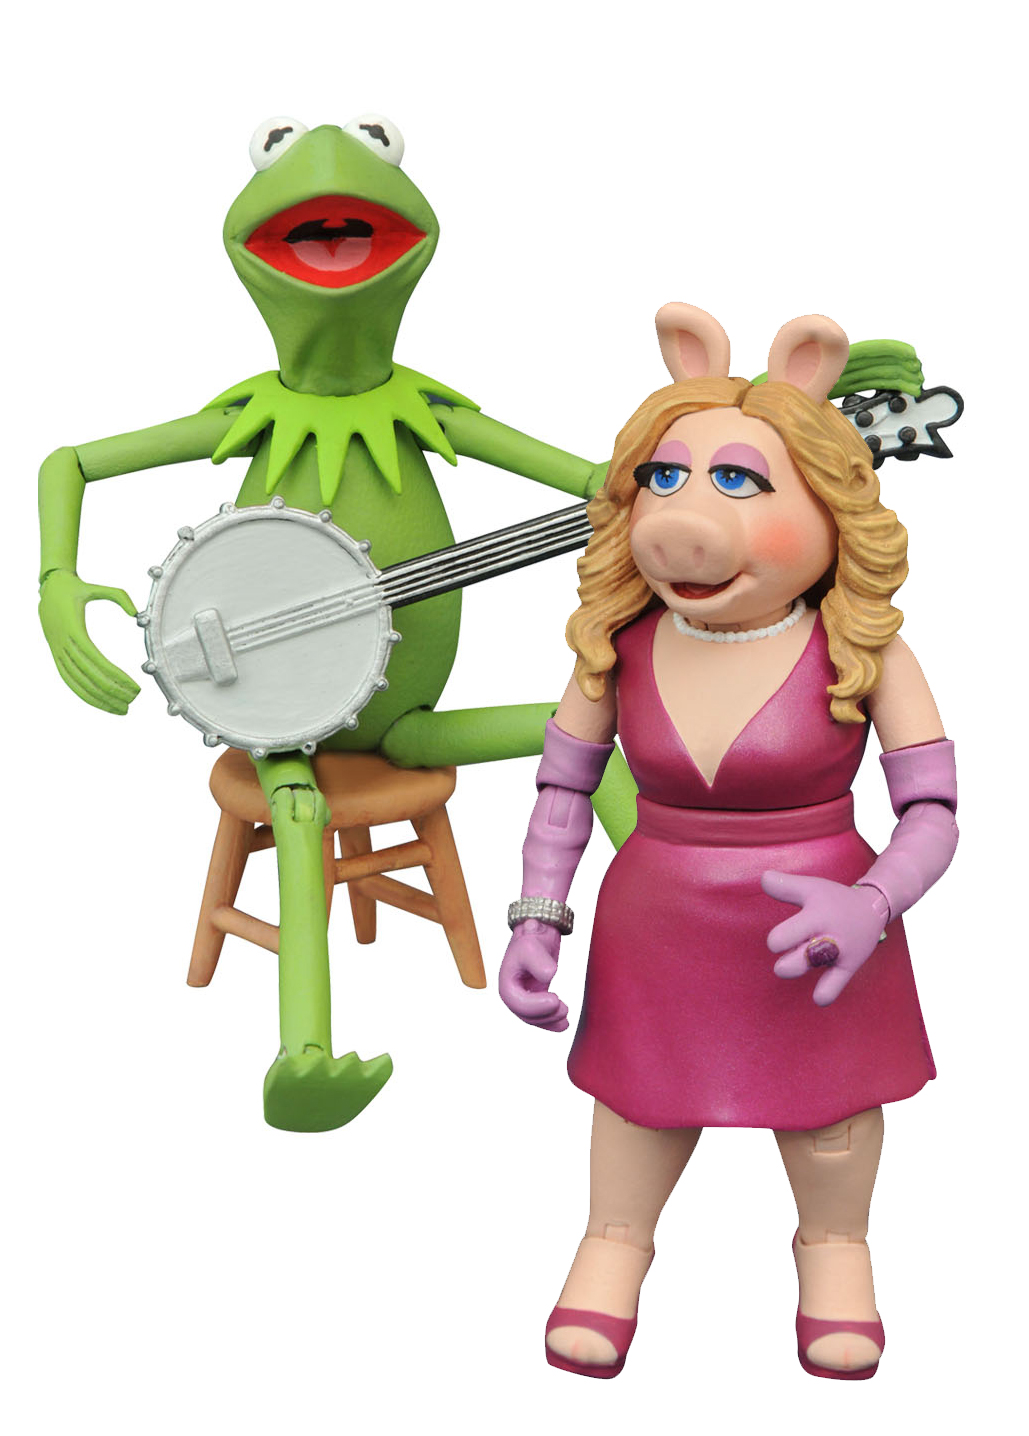 Muppets Select Best of Series 1 Action Figure Kermit & Missy Piggy